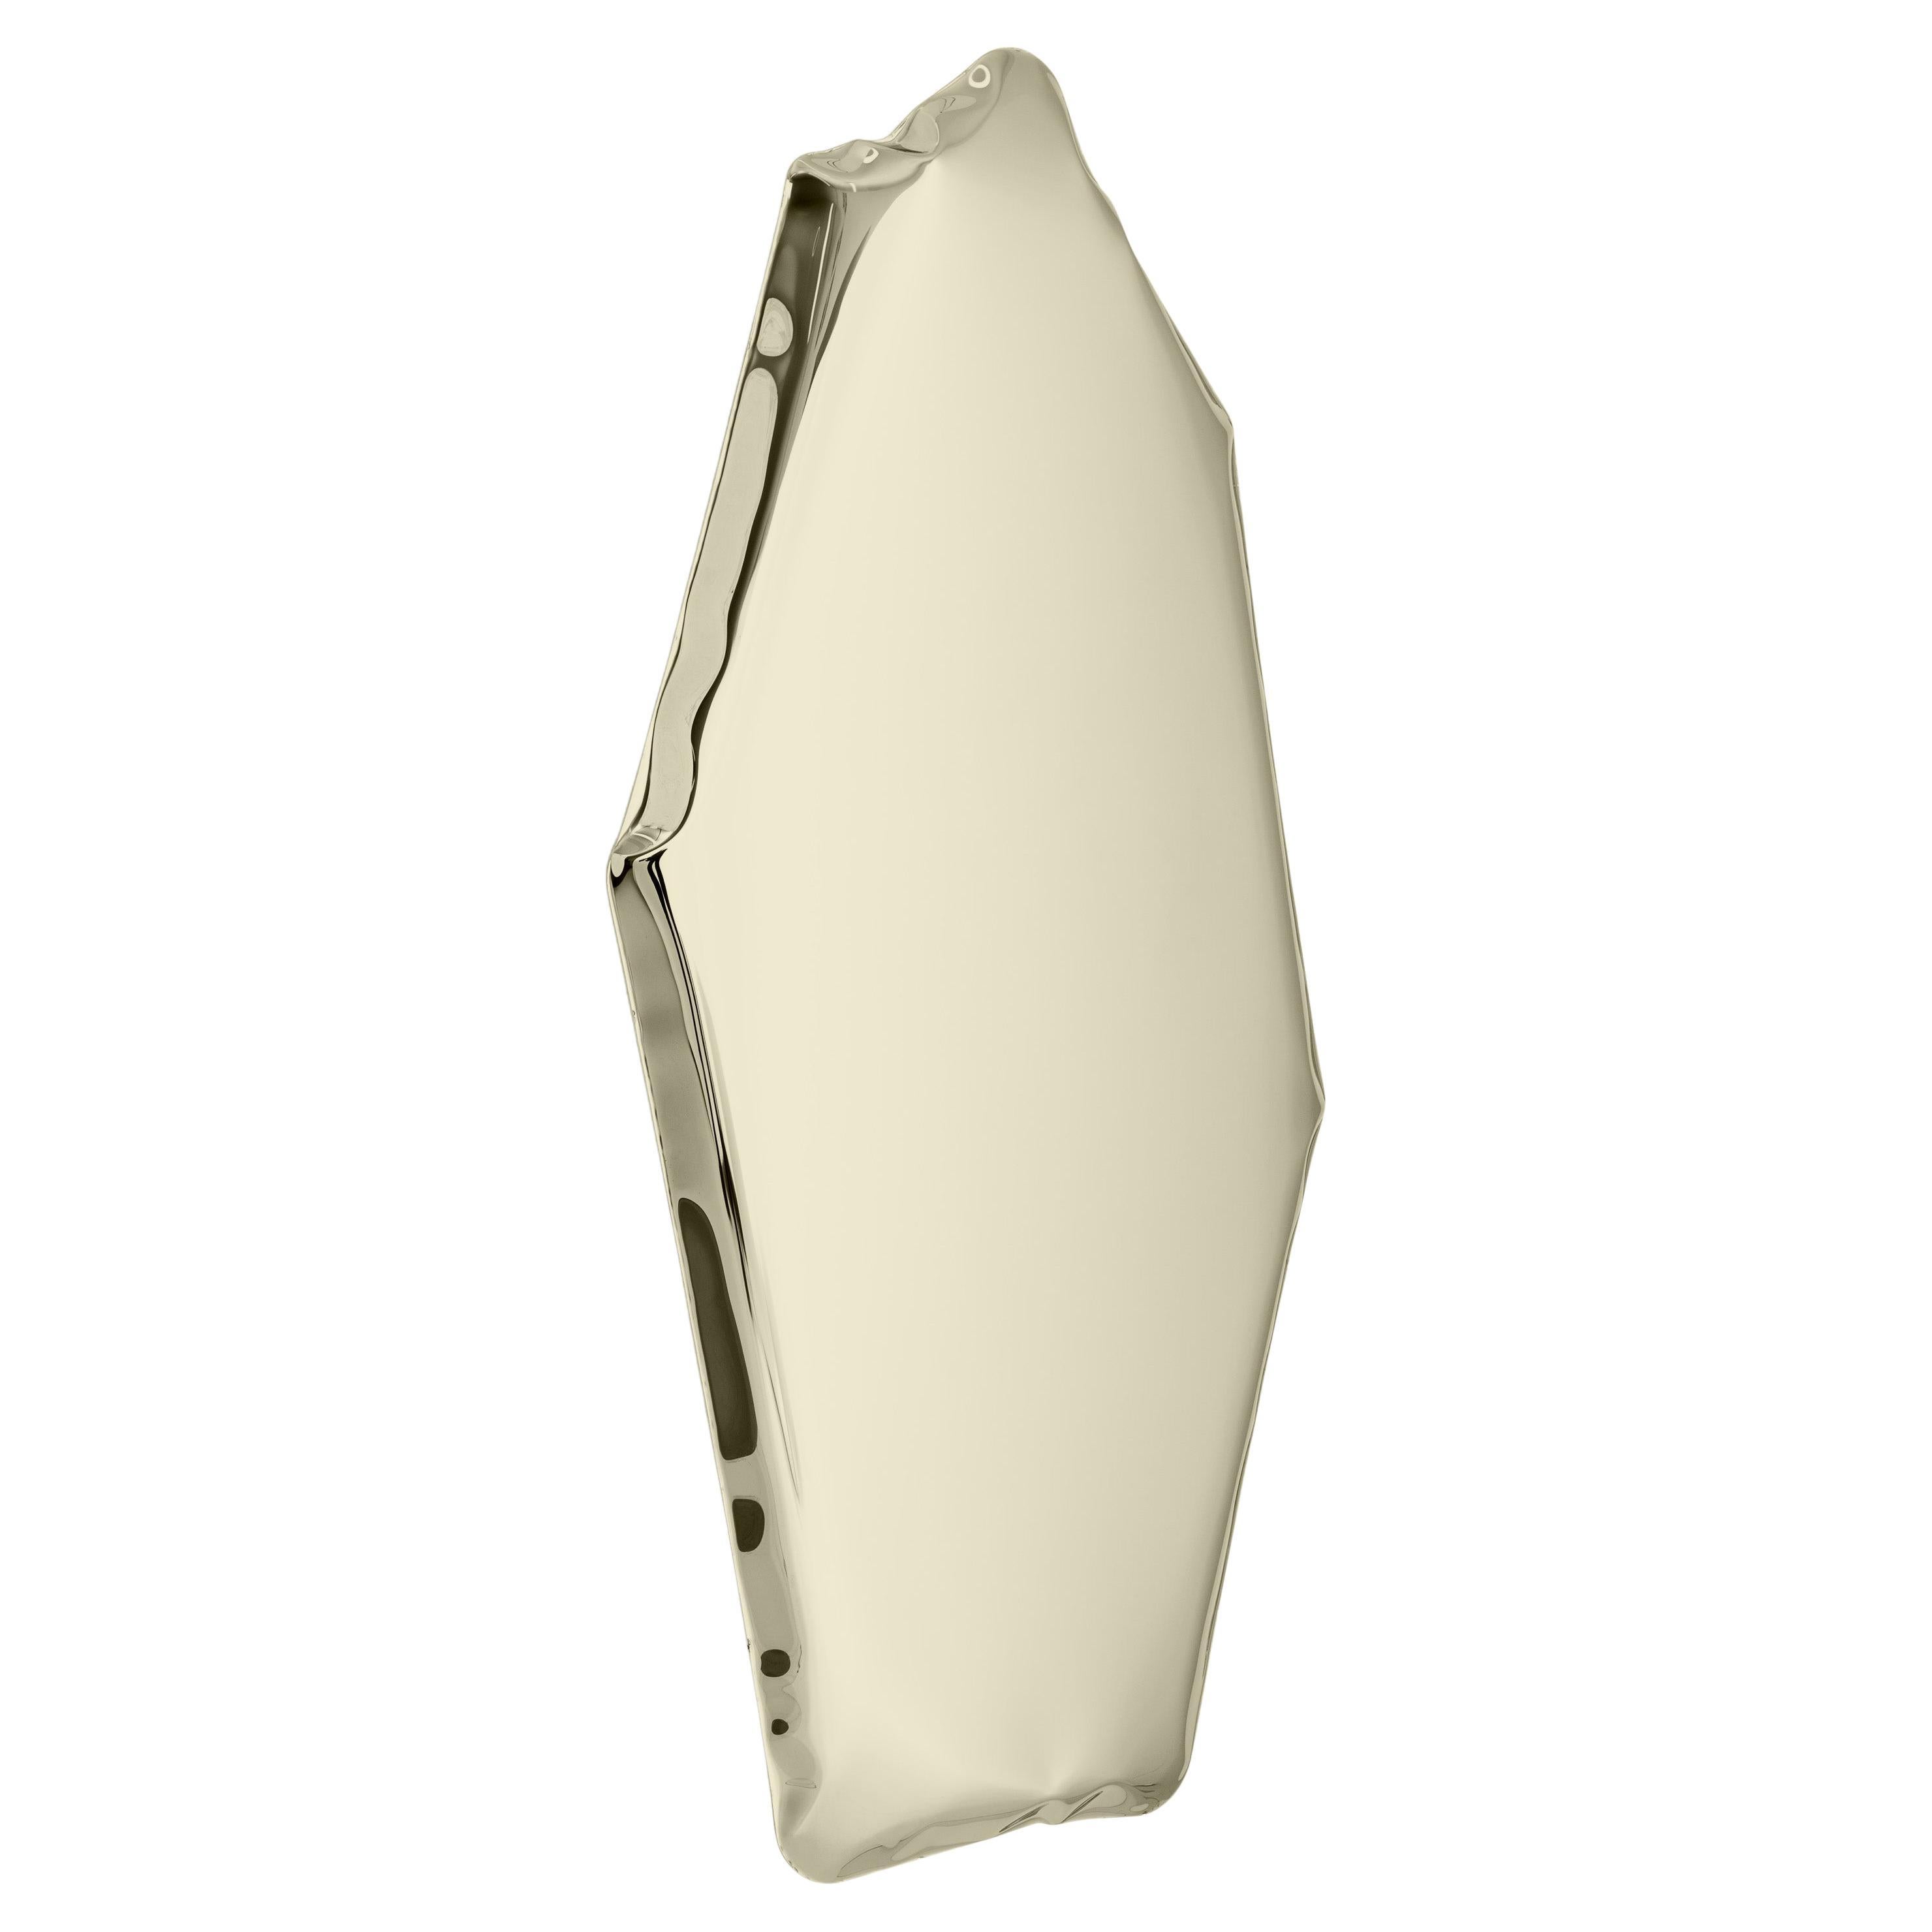 Tafla C4 Polished Stainless Steel Light Gold Color Wall Mirror by Zieta For Sale